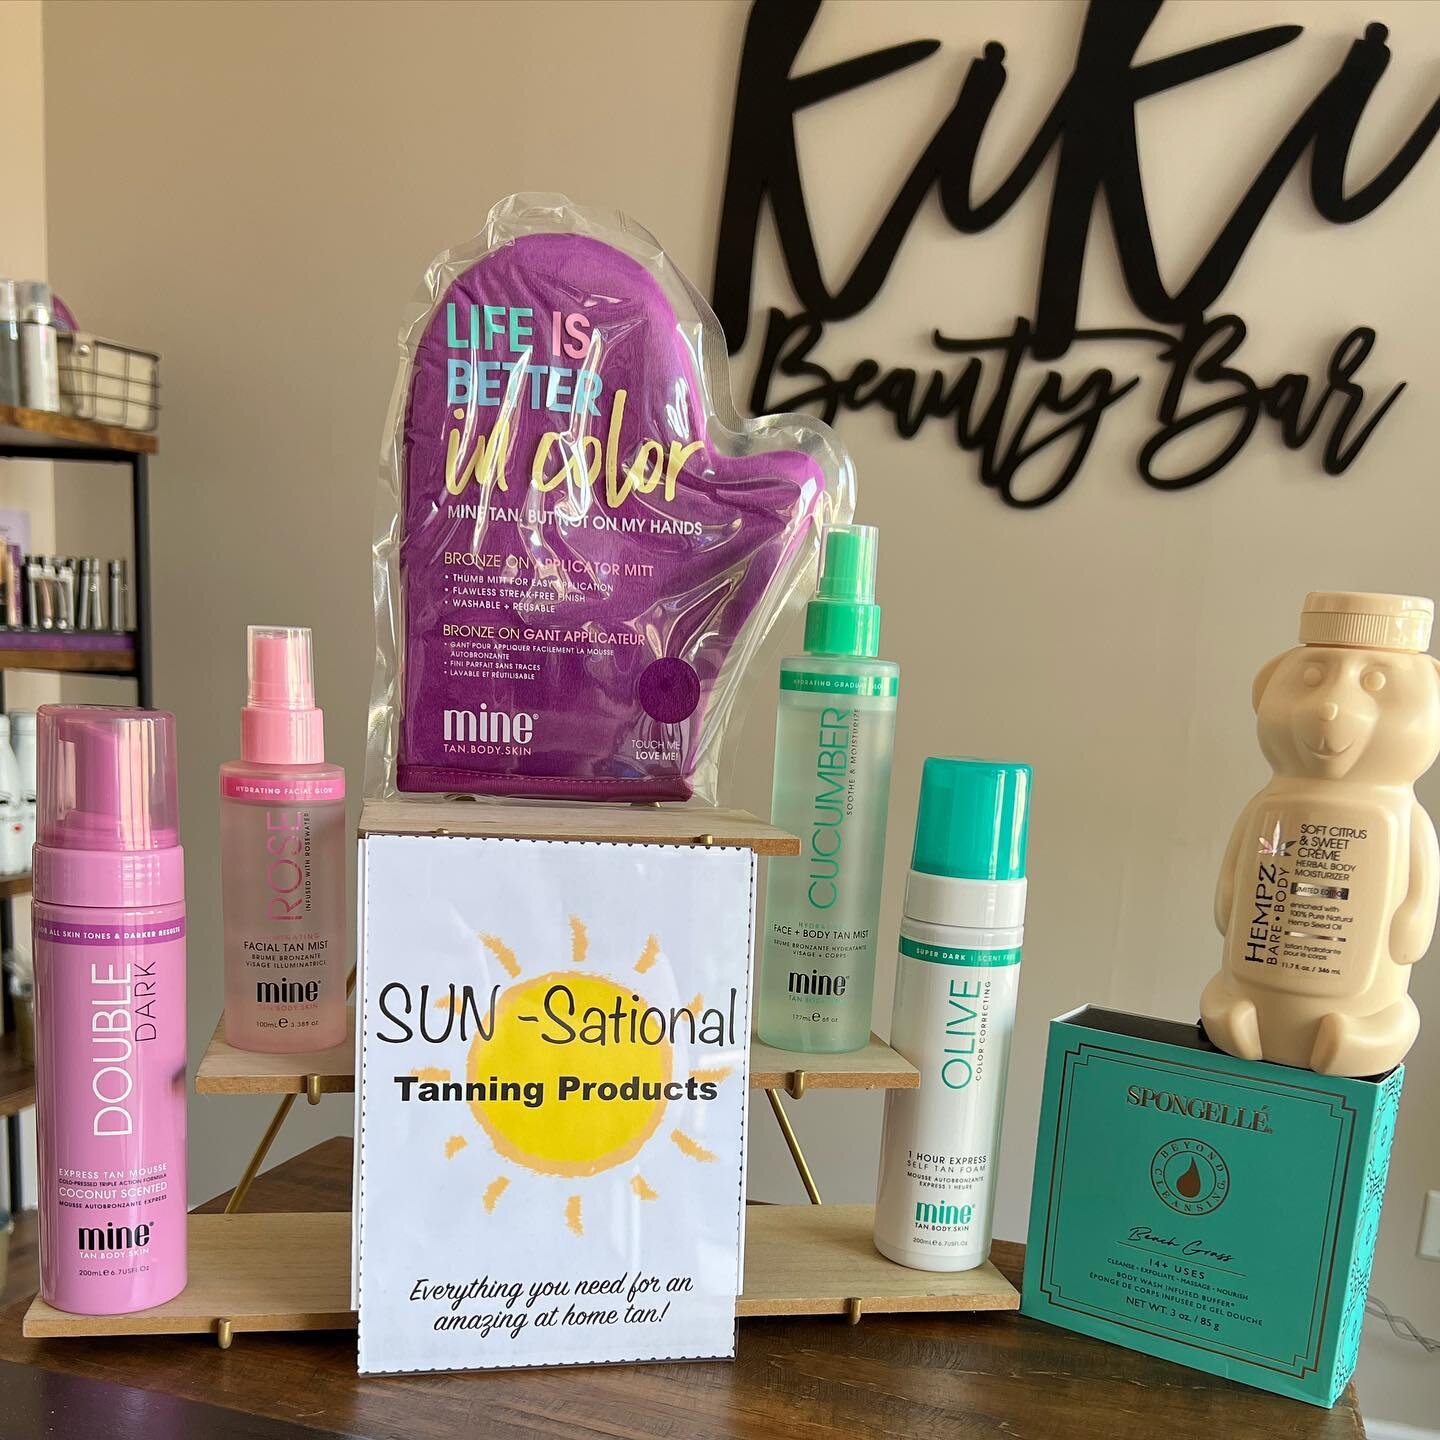 Memorial Day weekend is coming up quick! Book your waxing and sprays now before the slots are filled. Can&rsquo;t get in? We also have amazing self tan products for home use!